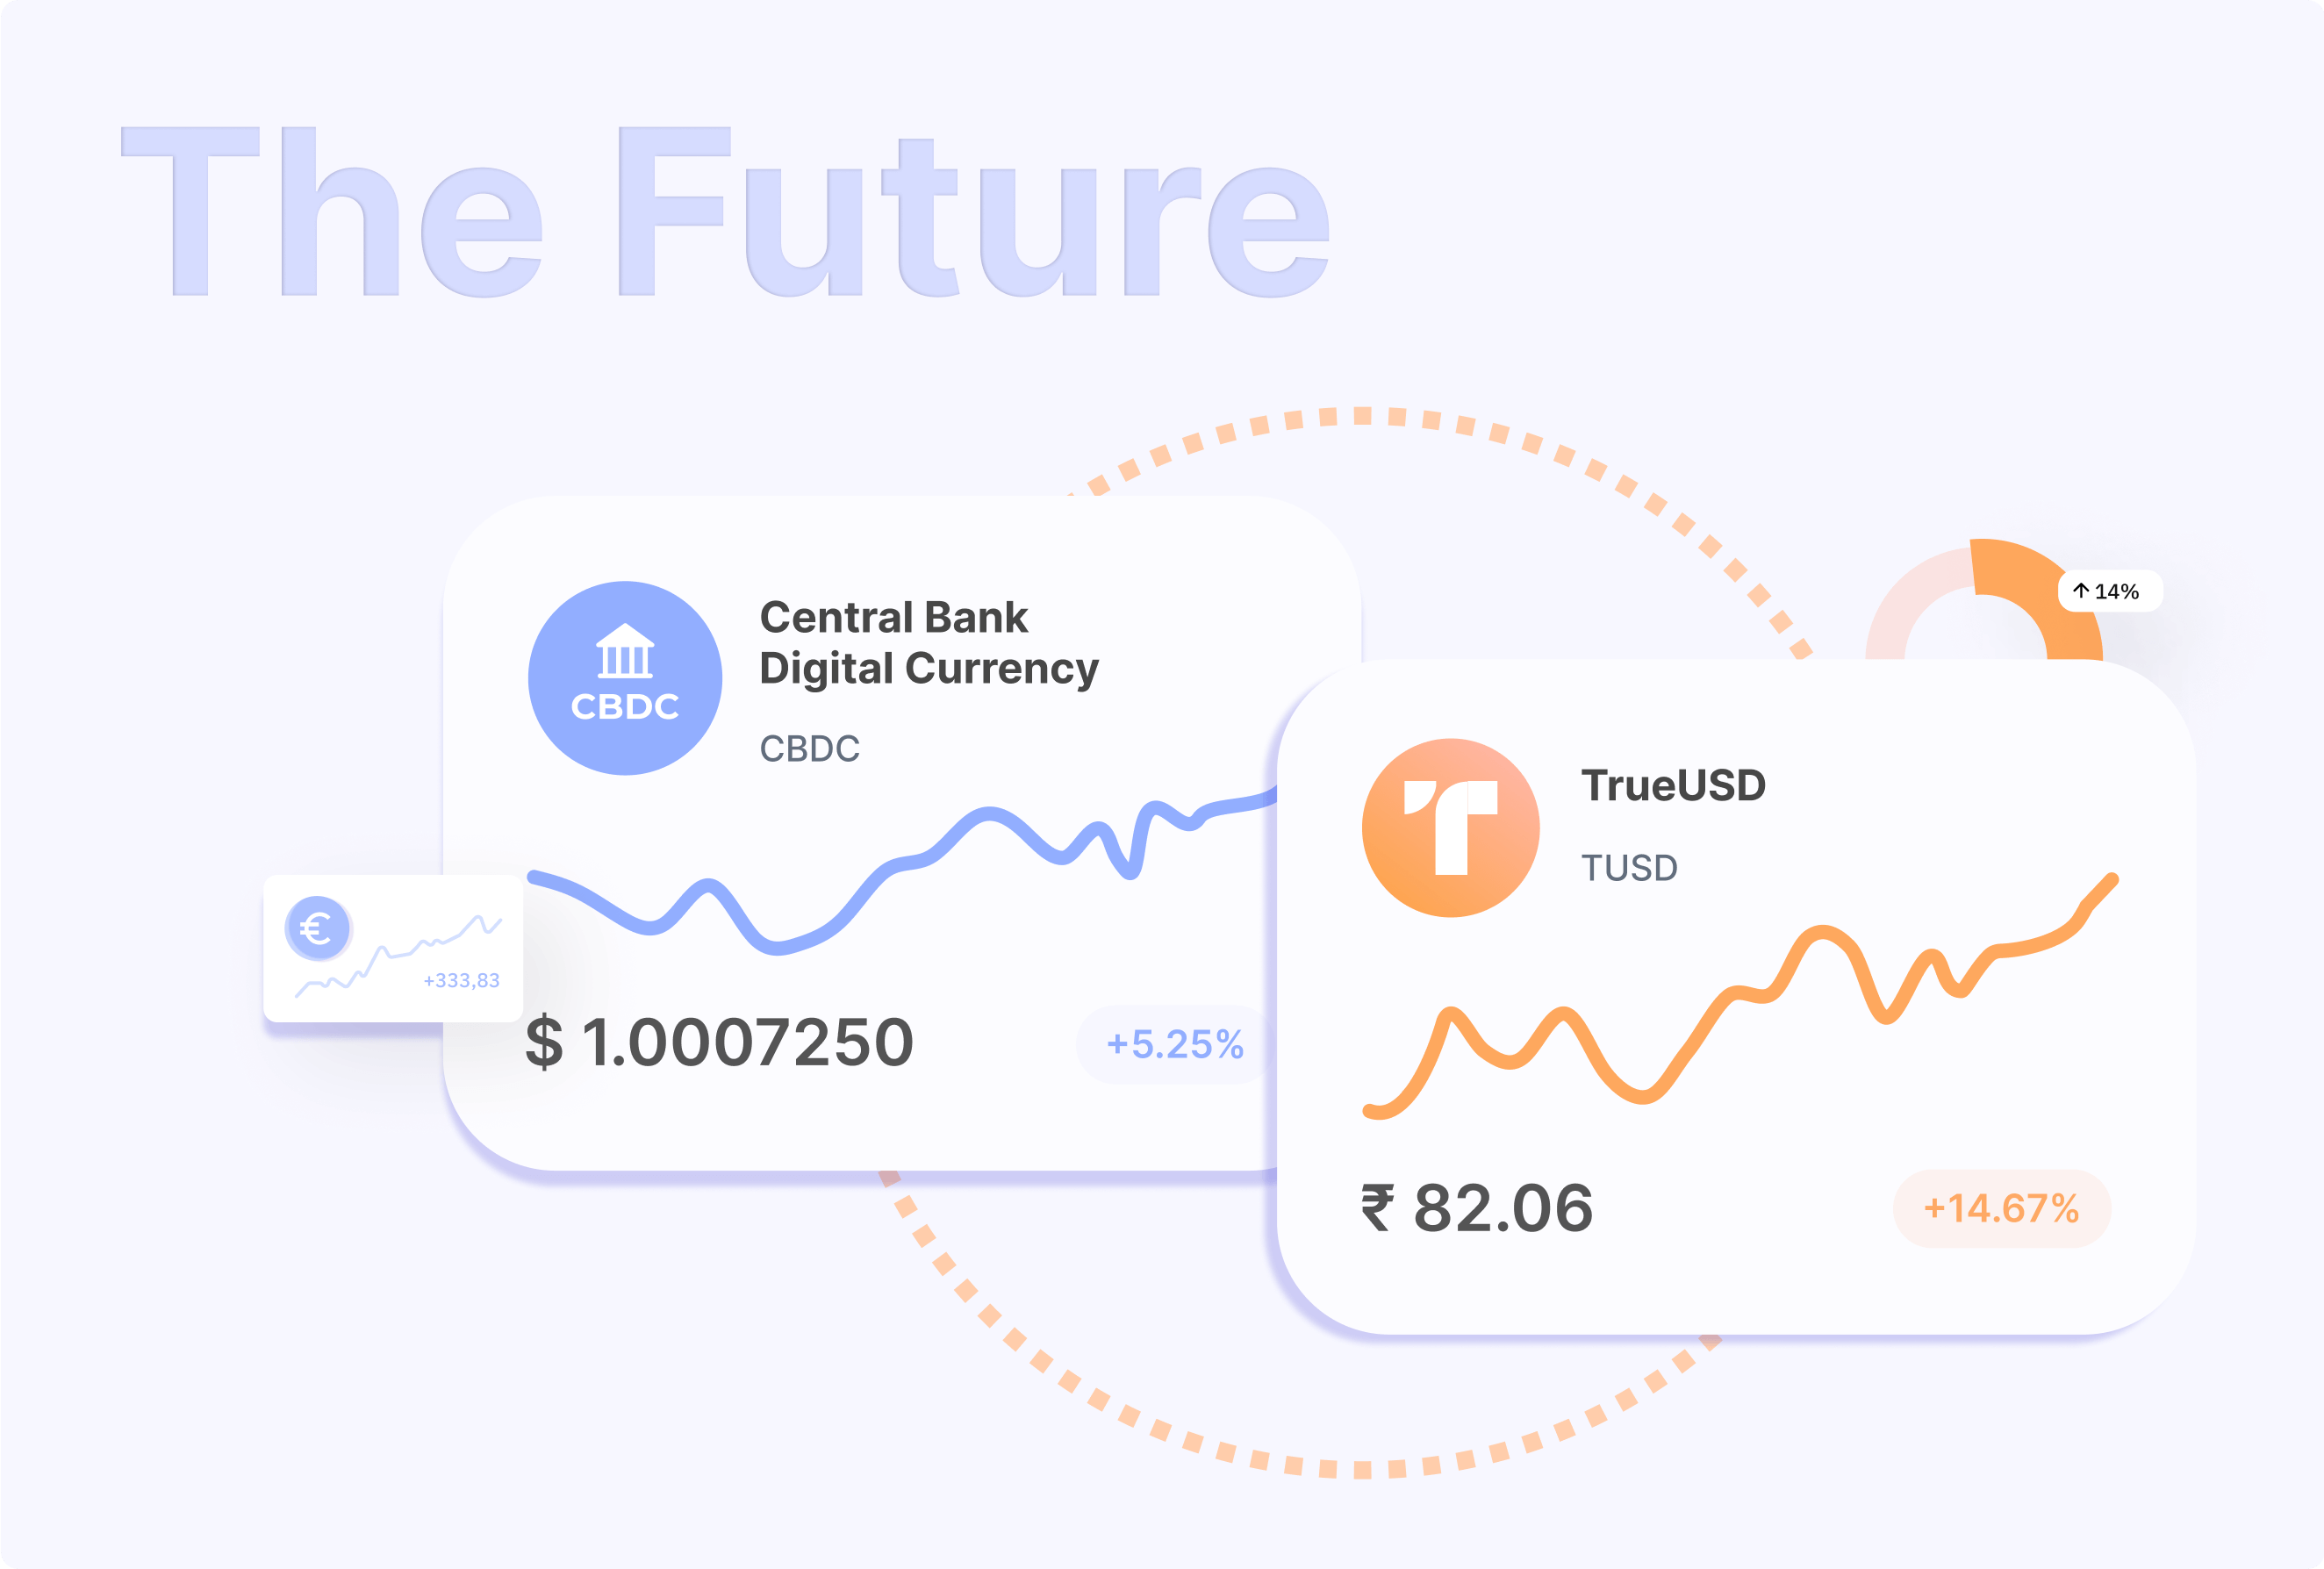 https://liquidity-provider.com/app/uploads/2022/11/the-future-of-stablecoins-and-central-bank-digital-currencies.png